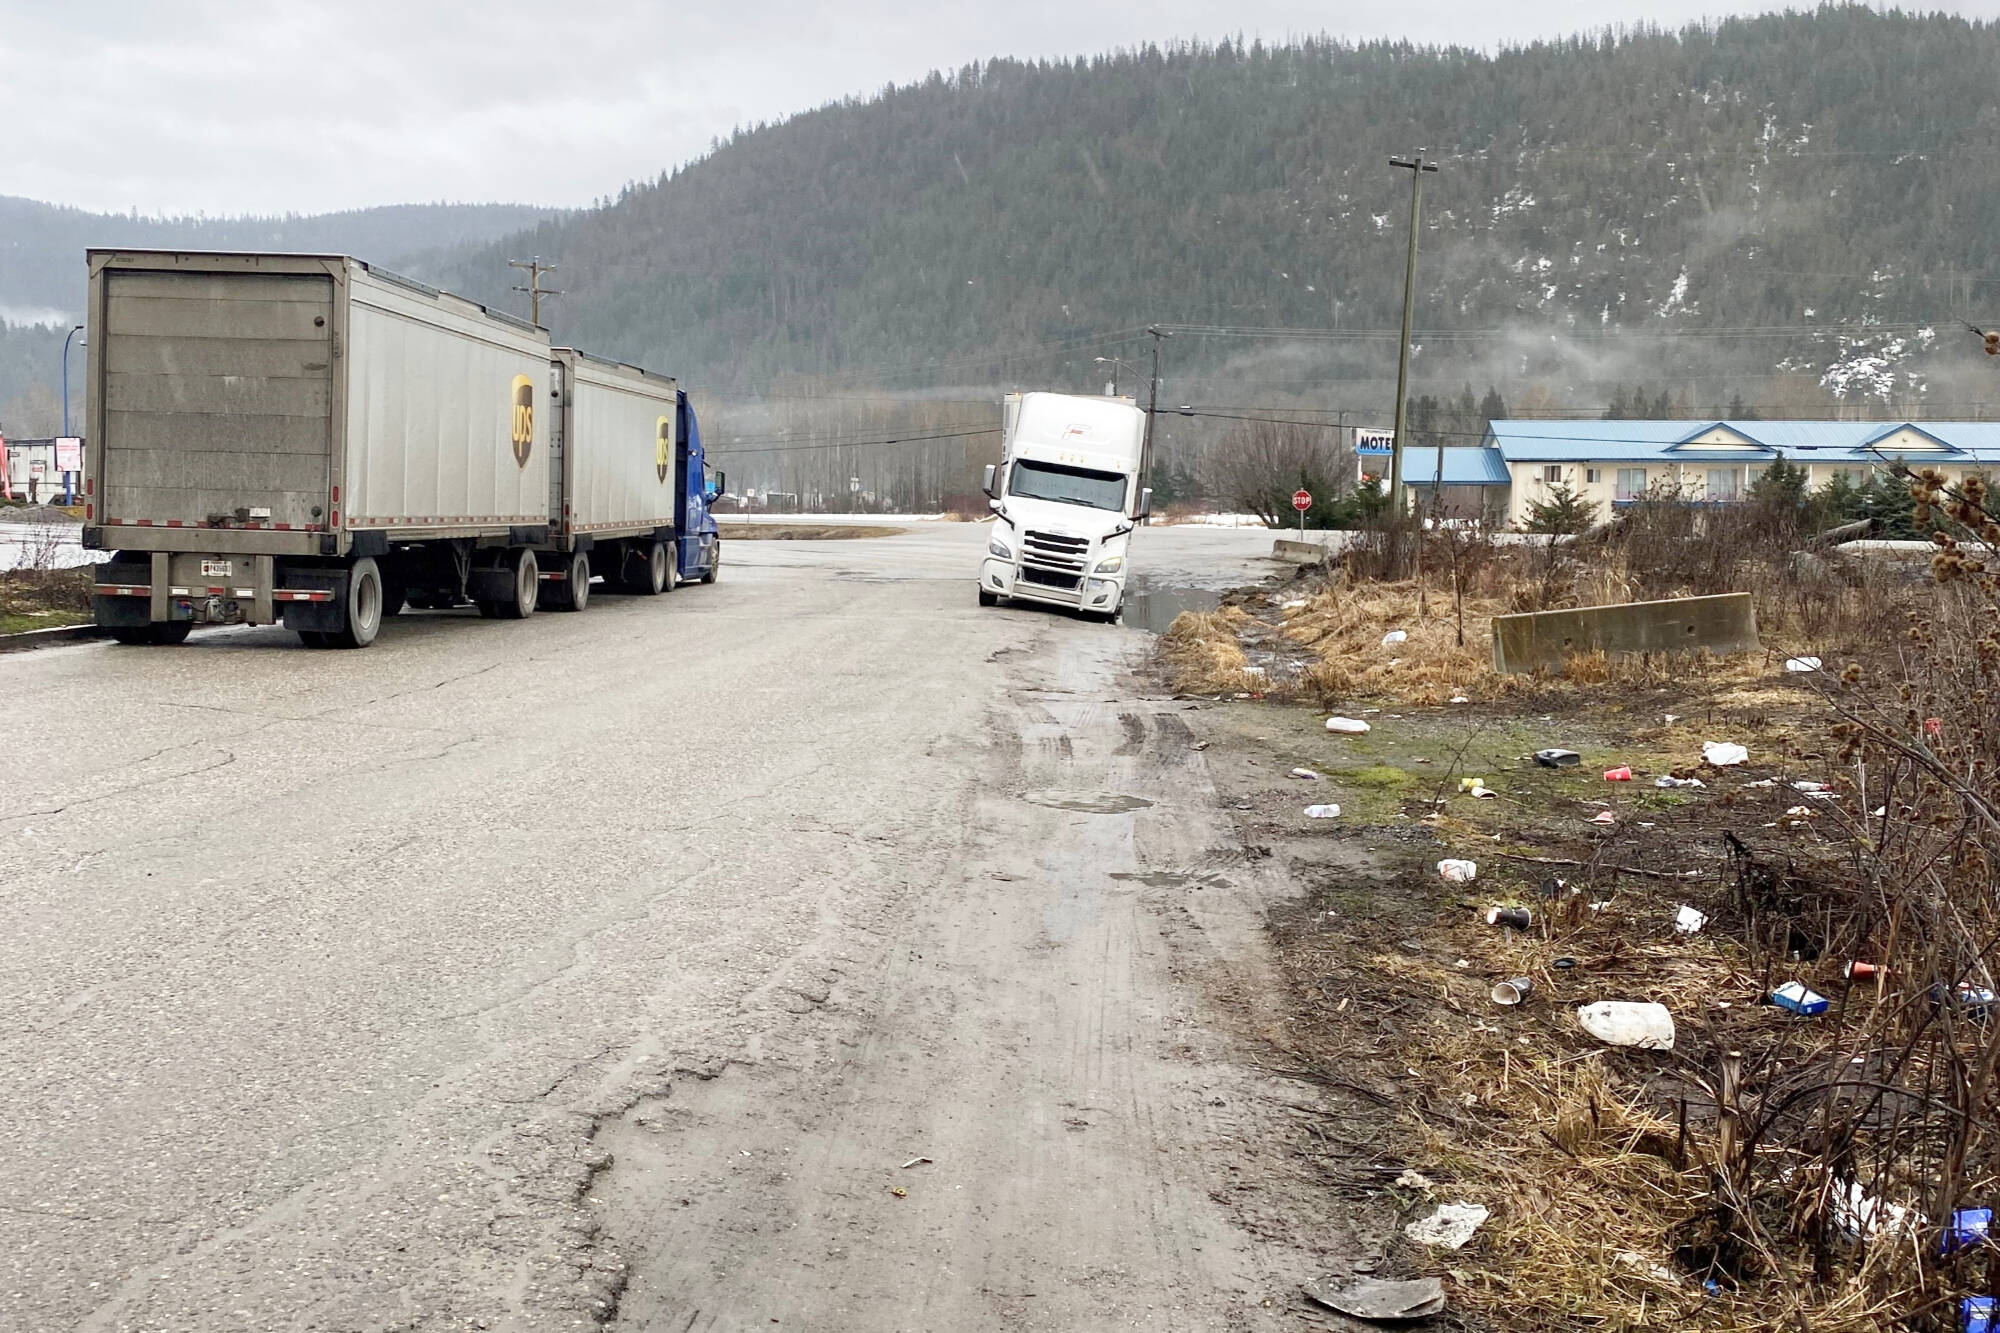 Sicamous’ mayor and council expressed frustration over the ongoing littering by the Sicamous Husky Travel Center. (District of Sicamous photo)